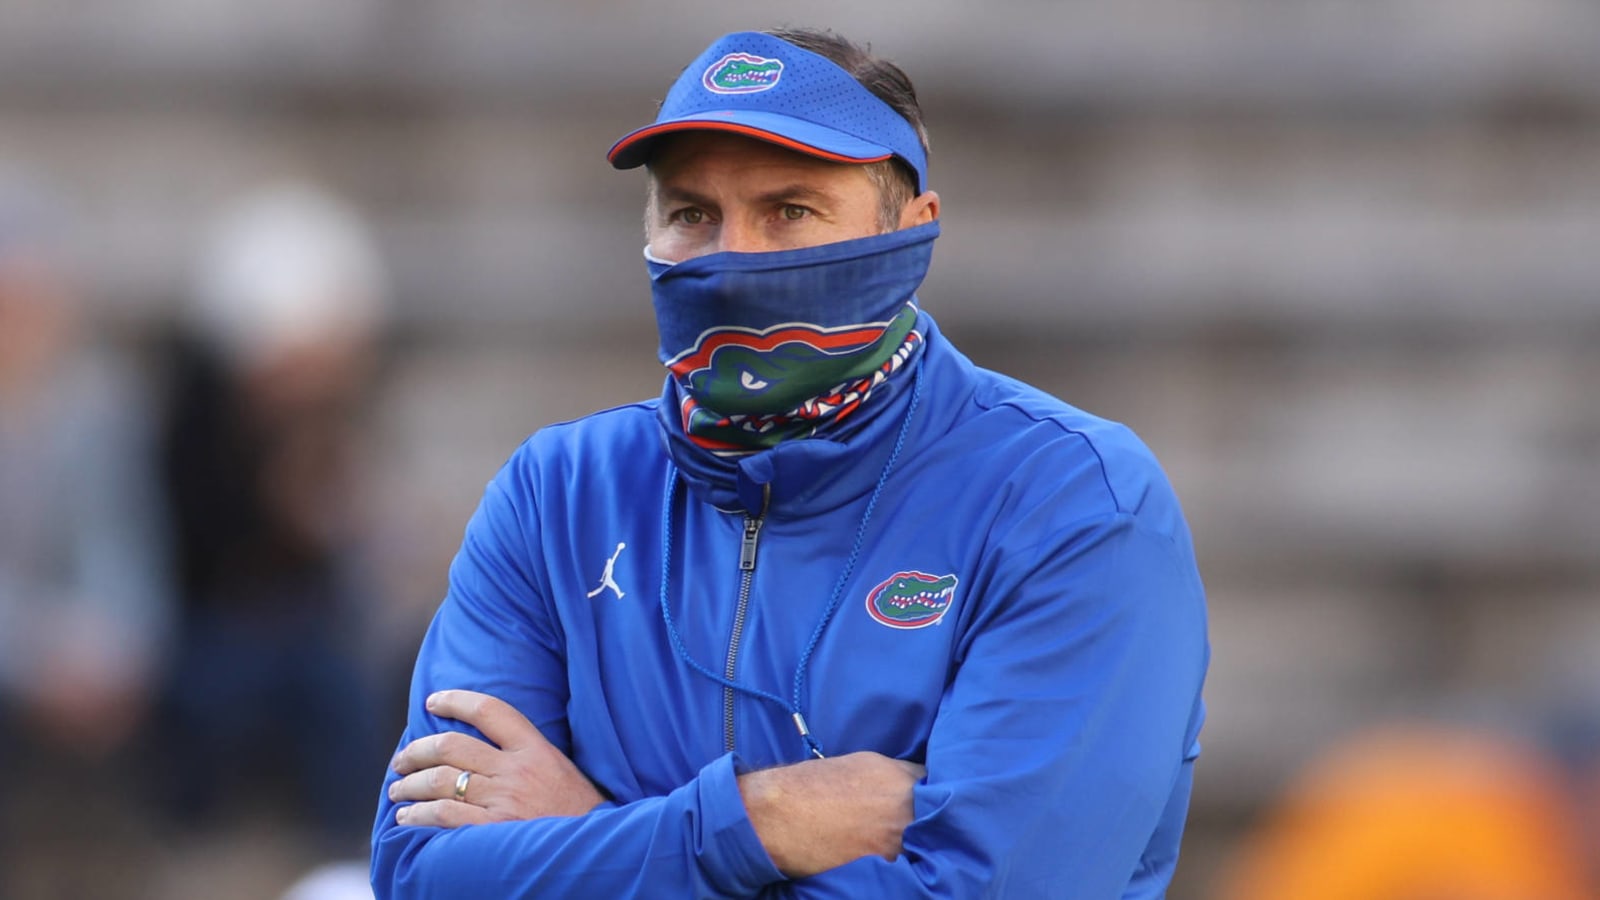 Mullen full of excuses after Florida gets hammered 